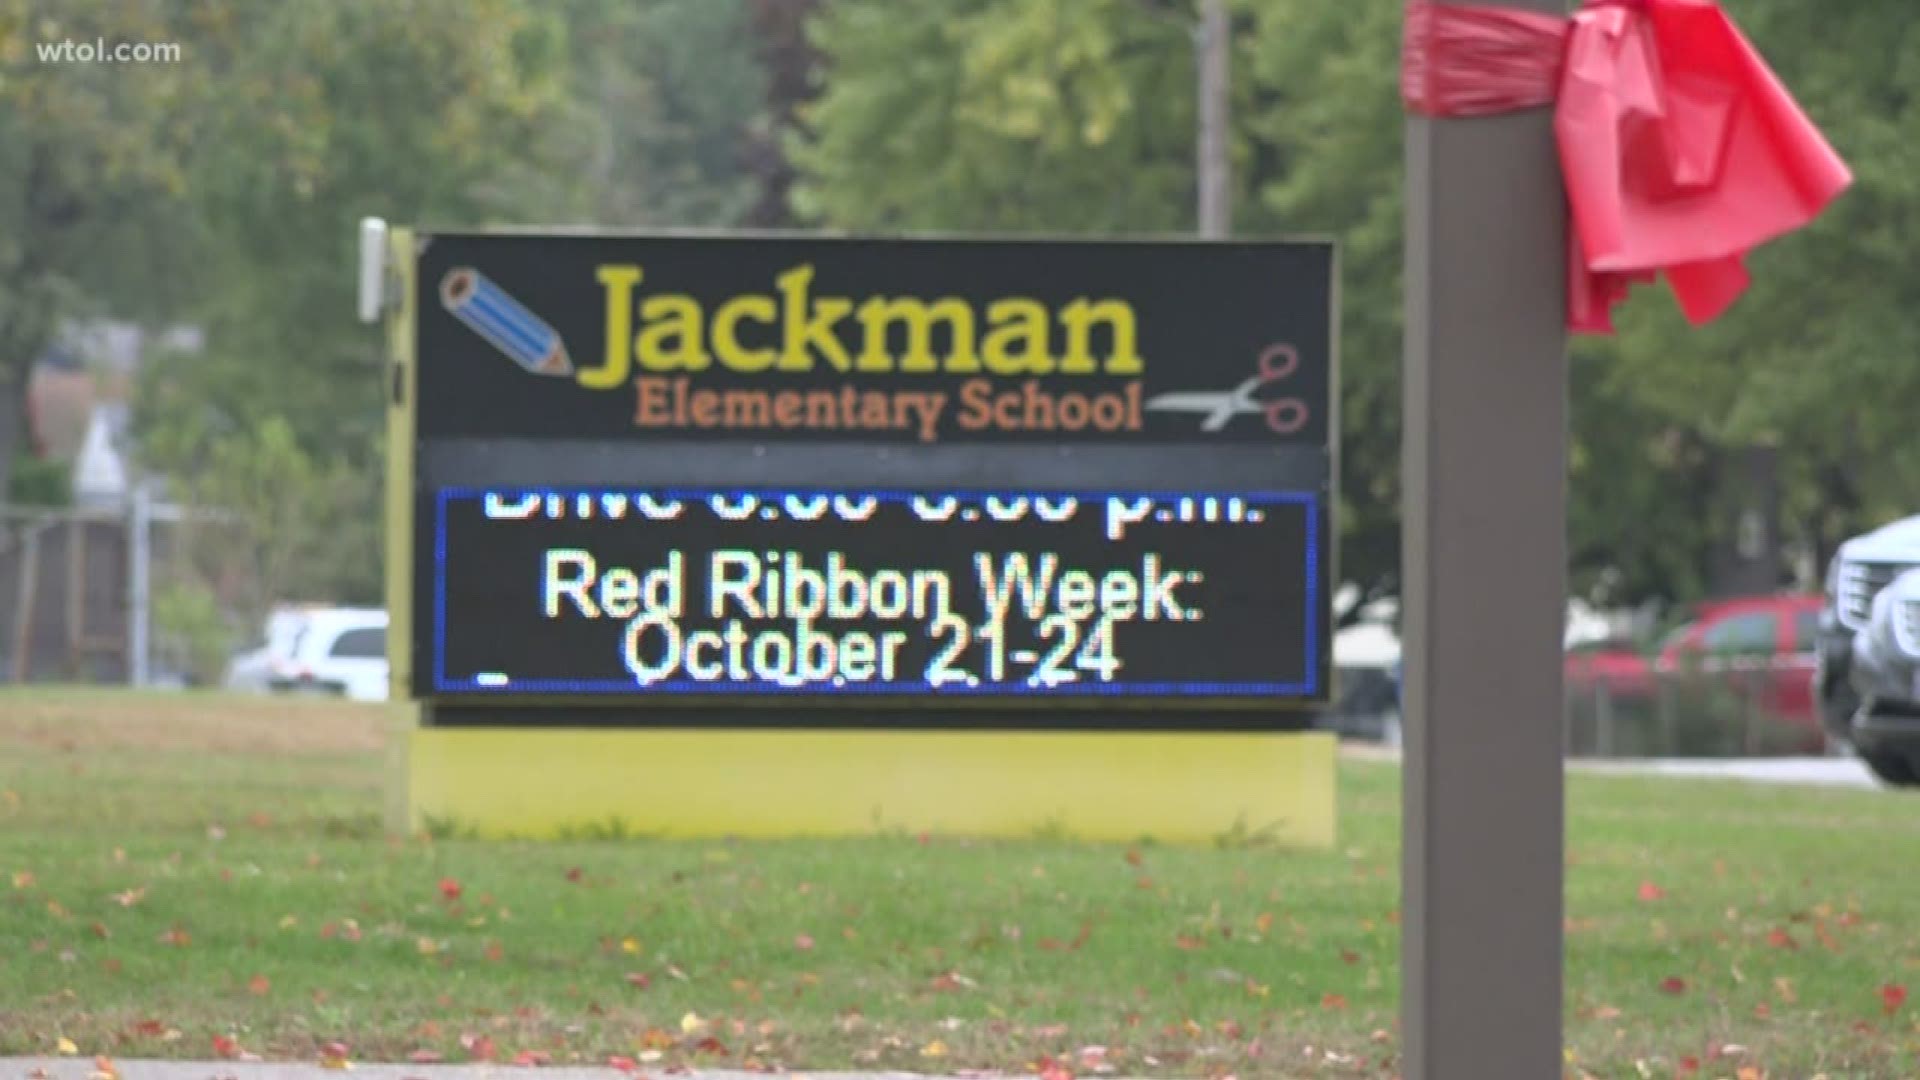 Parents of students at Jackman Elementary School in west Toledo are speaking out with concerns after they were not notified of an assault investigation.